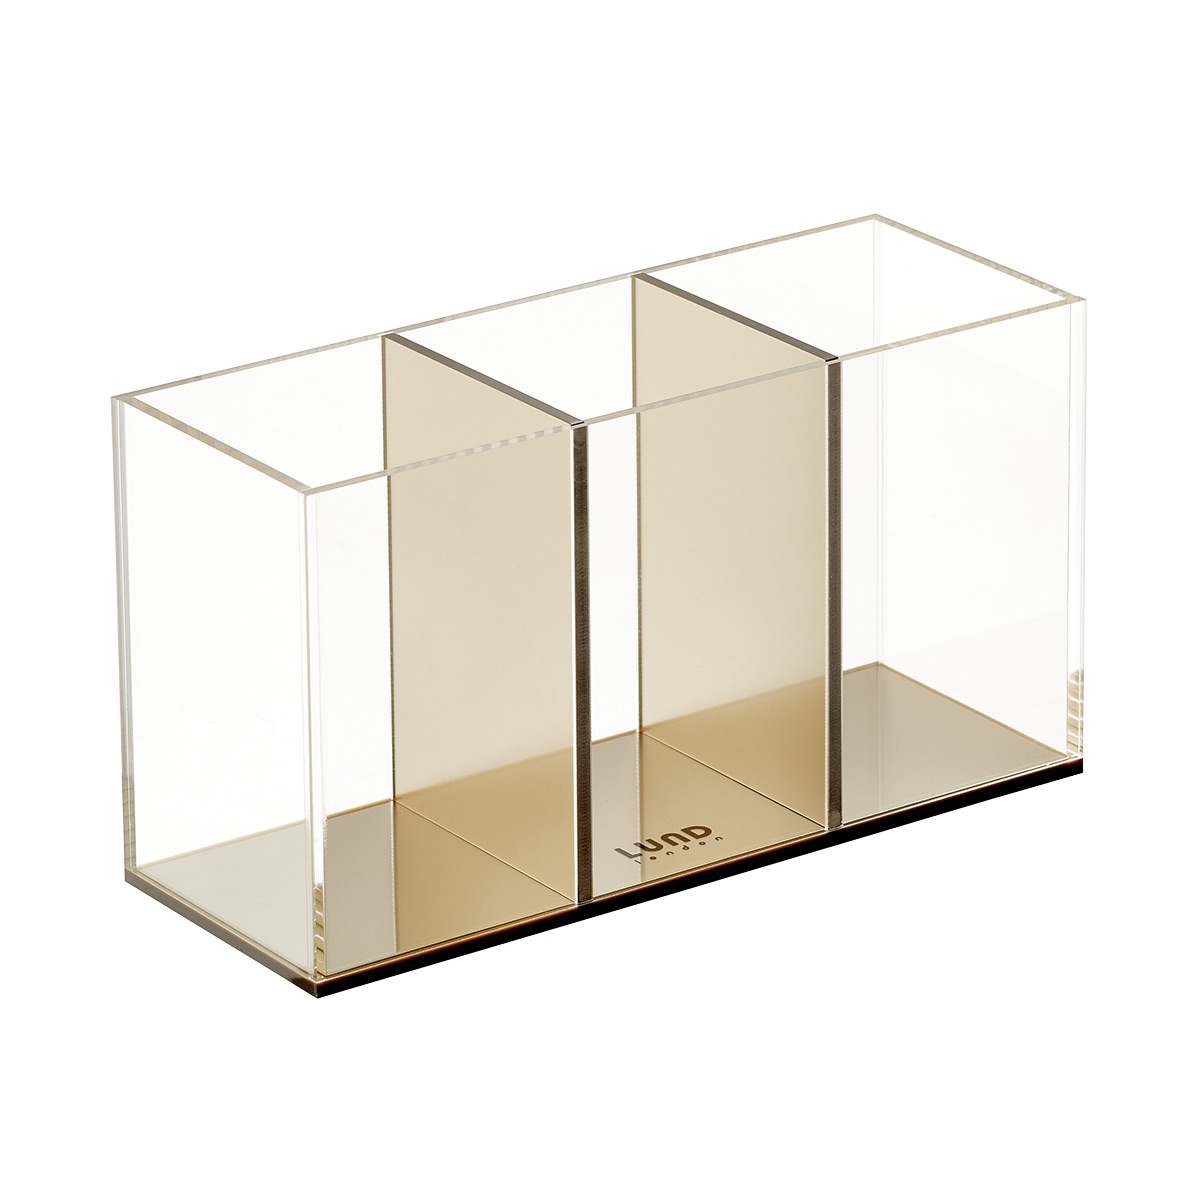 https://www.containerstore.com/catalogimages/478651/10091661-lund-london-blair-3-section.jpg